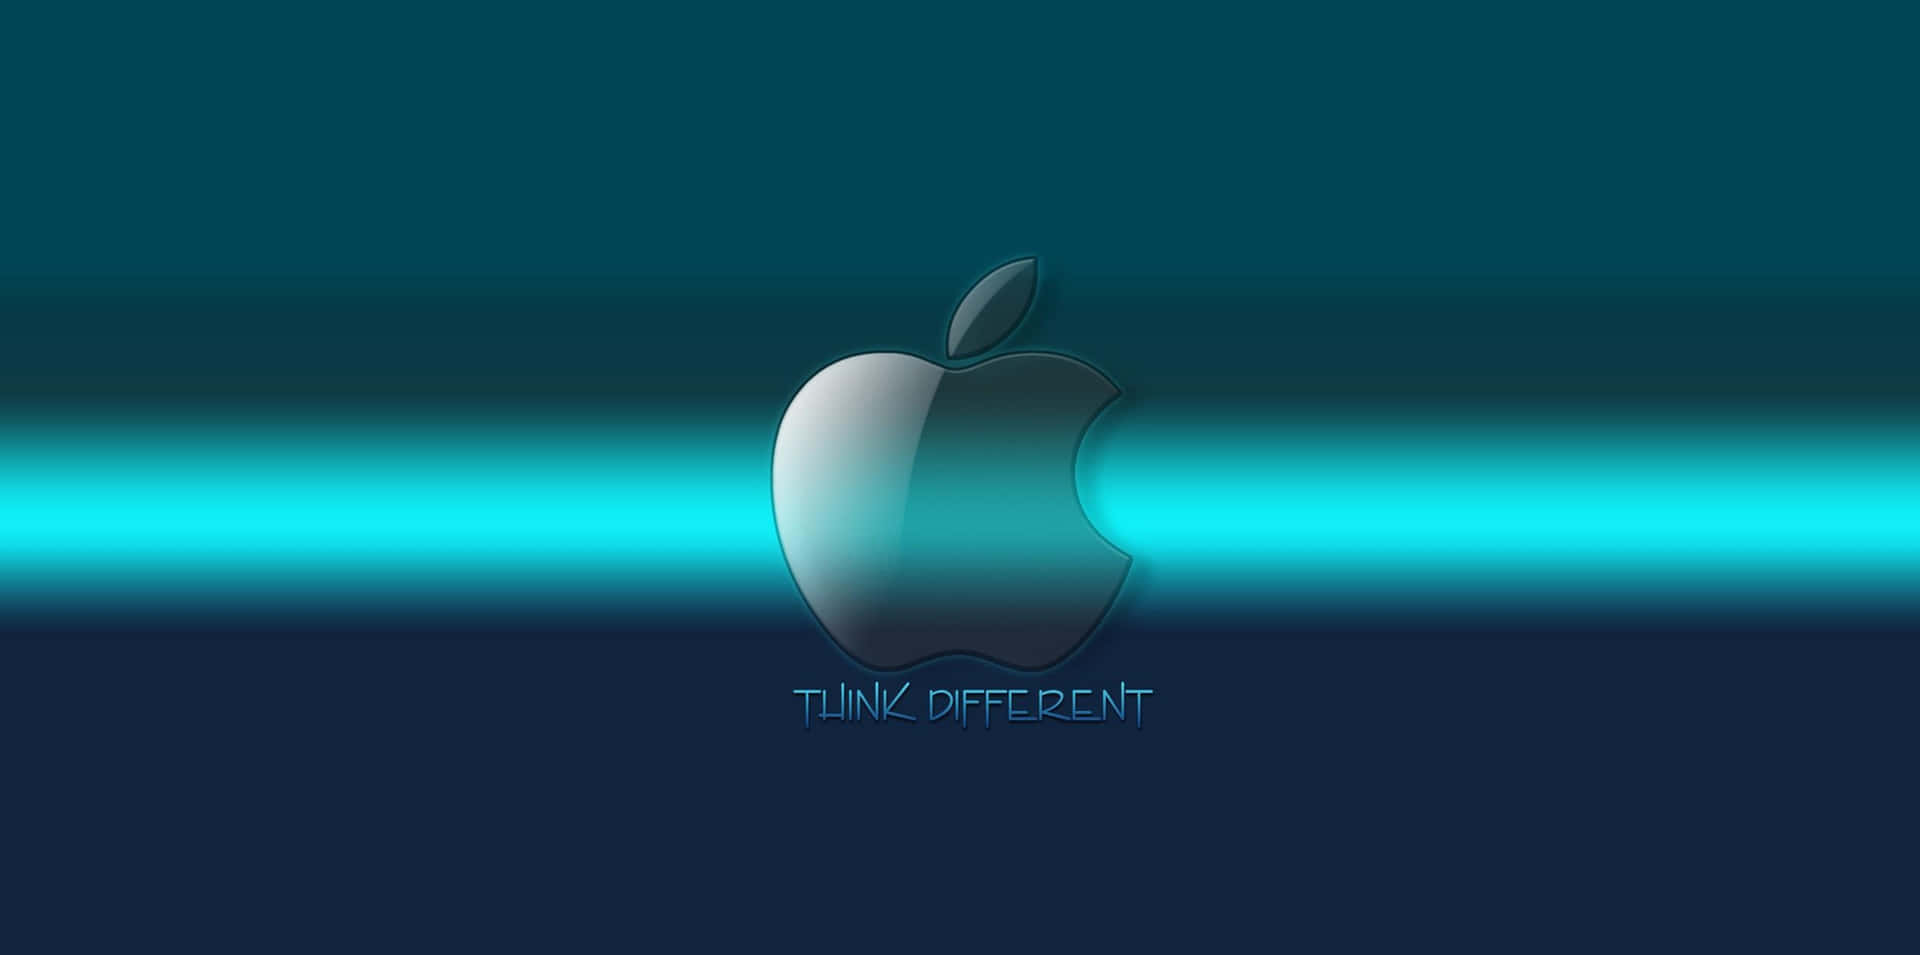 The Apple Logo With Blue And Green Stripes Wallpaper